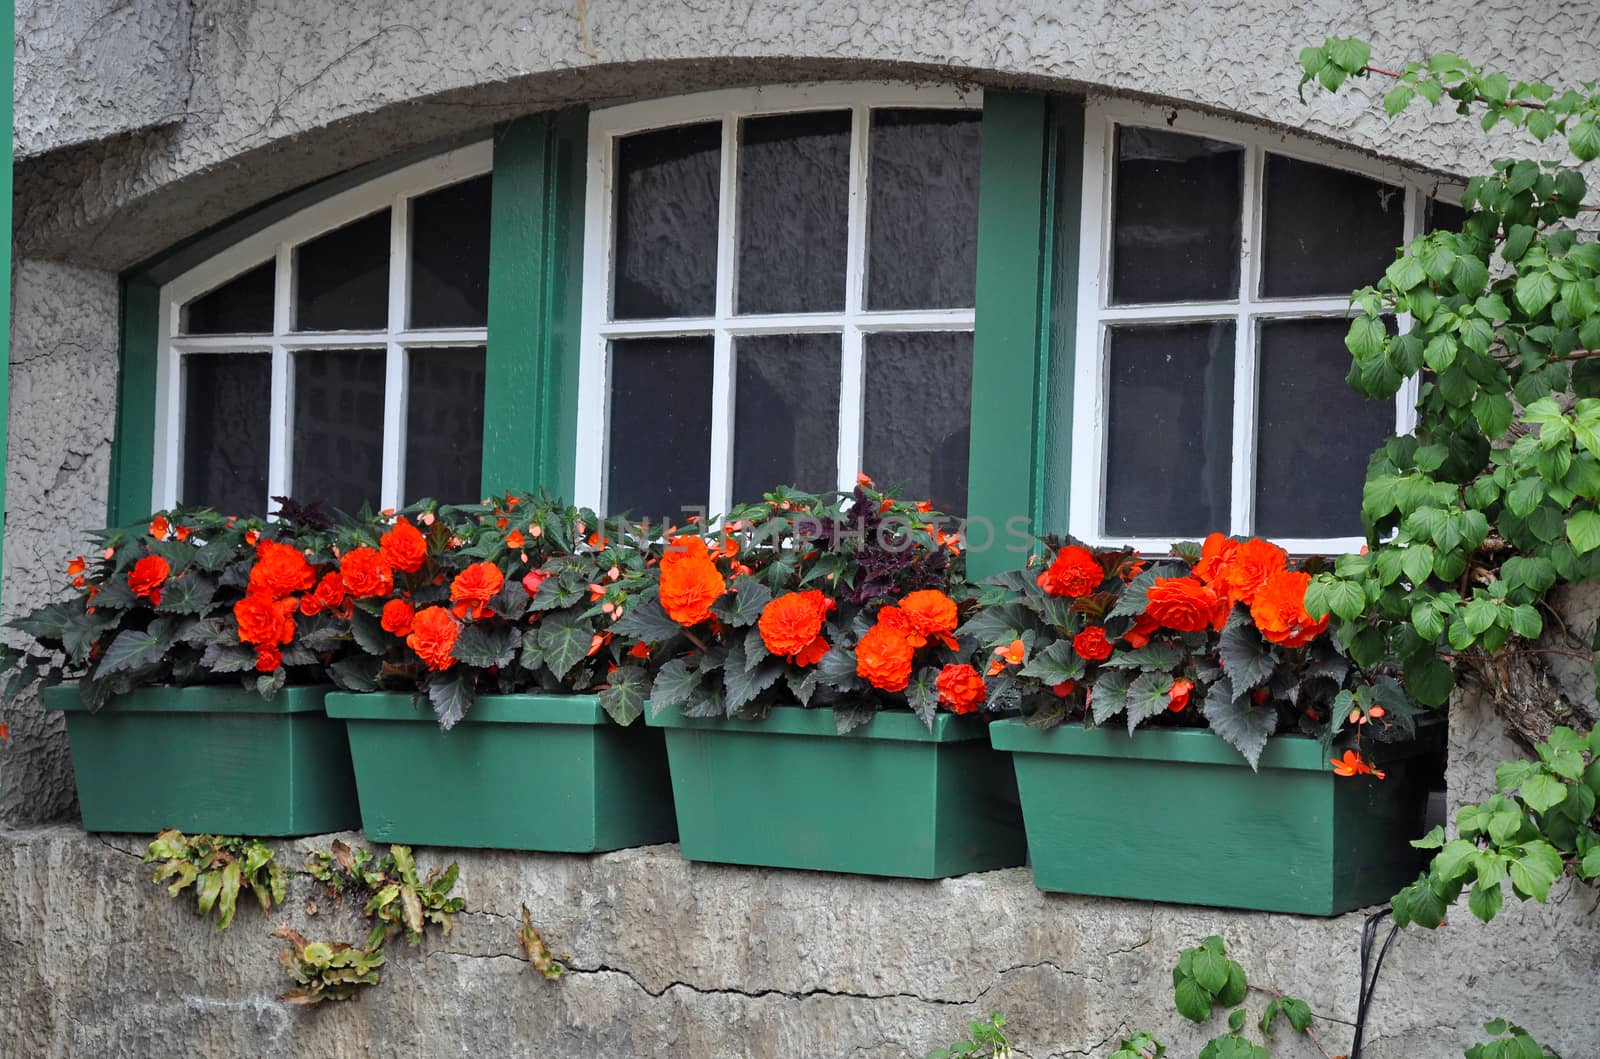 Green flower planters filled with red begonias on window sill